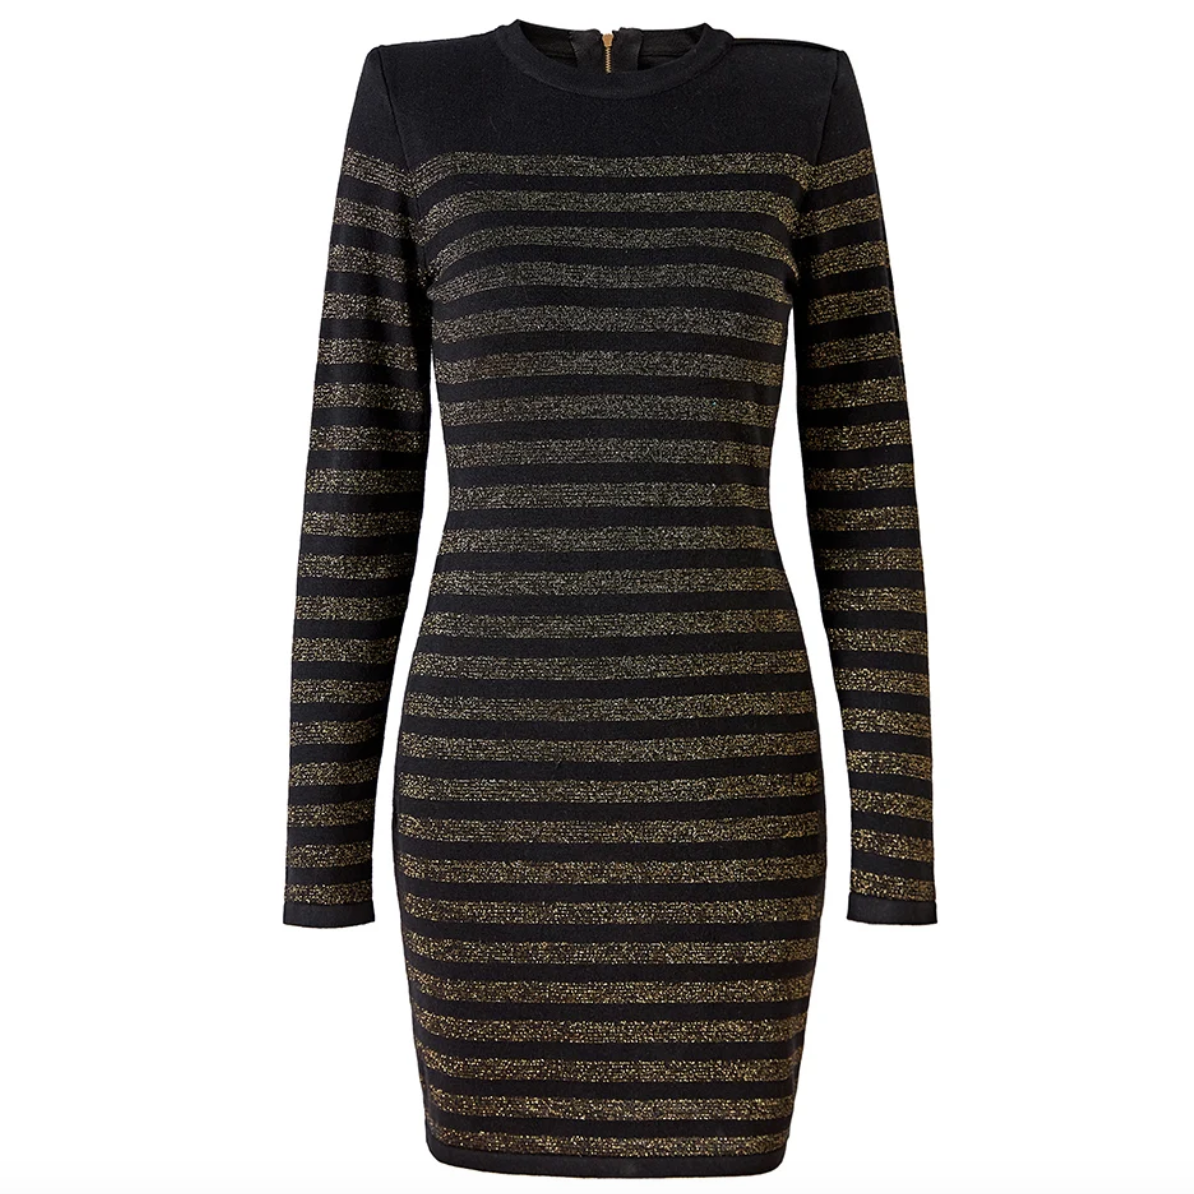 The Natalynska Zorba dress is a stunning long sleeve, bodycon, sexy fit mini dress with stripes and gold button detailing. 